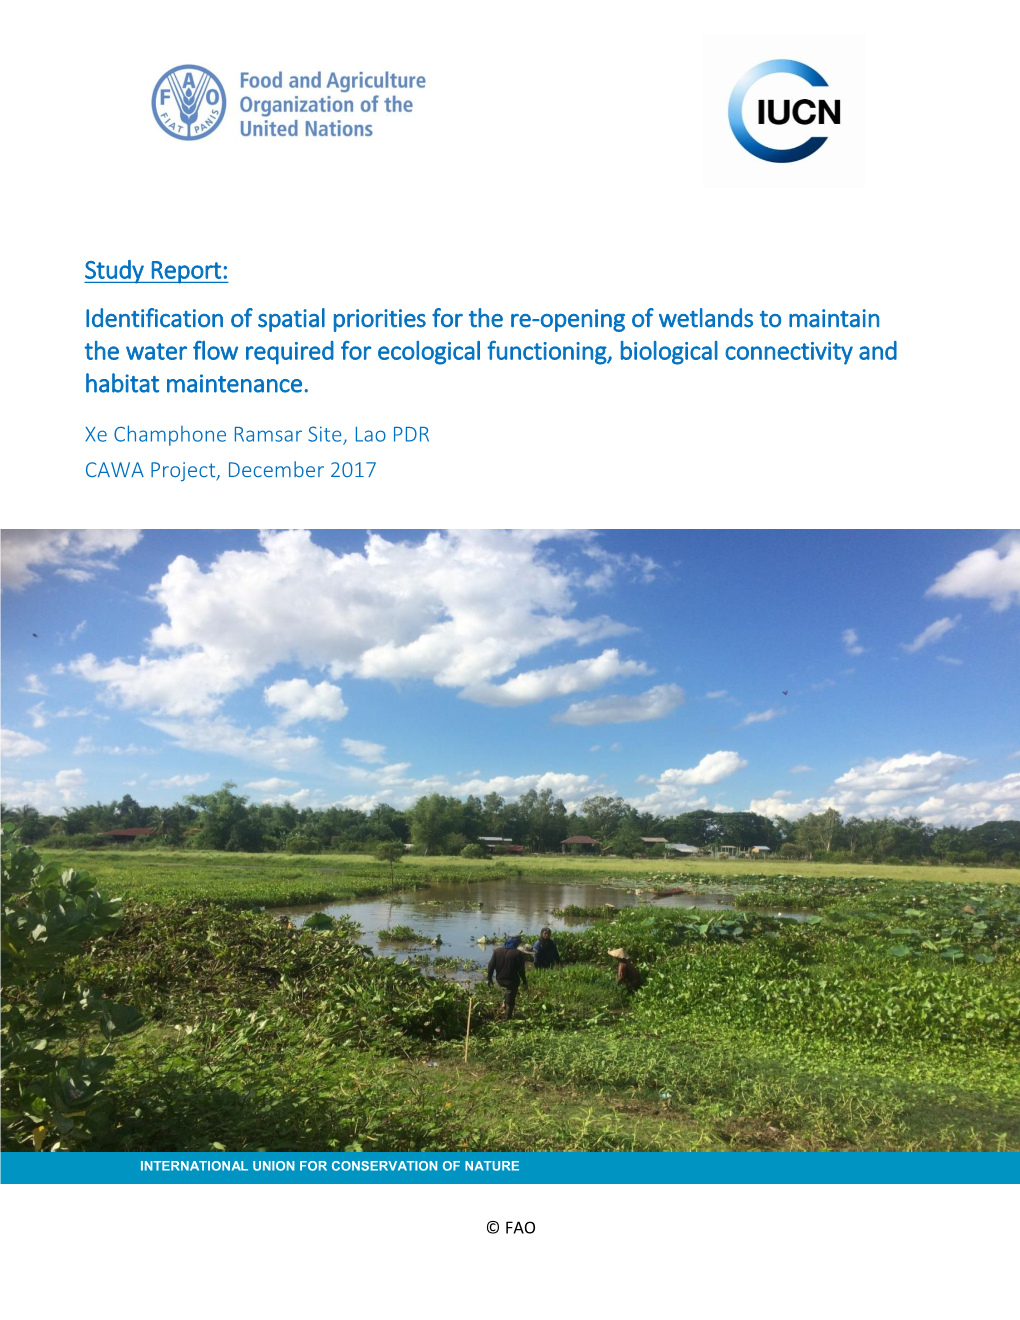 Identification of Spatial Priorities for the Re-Opening of Wetlands to Maintain